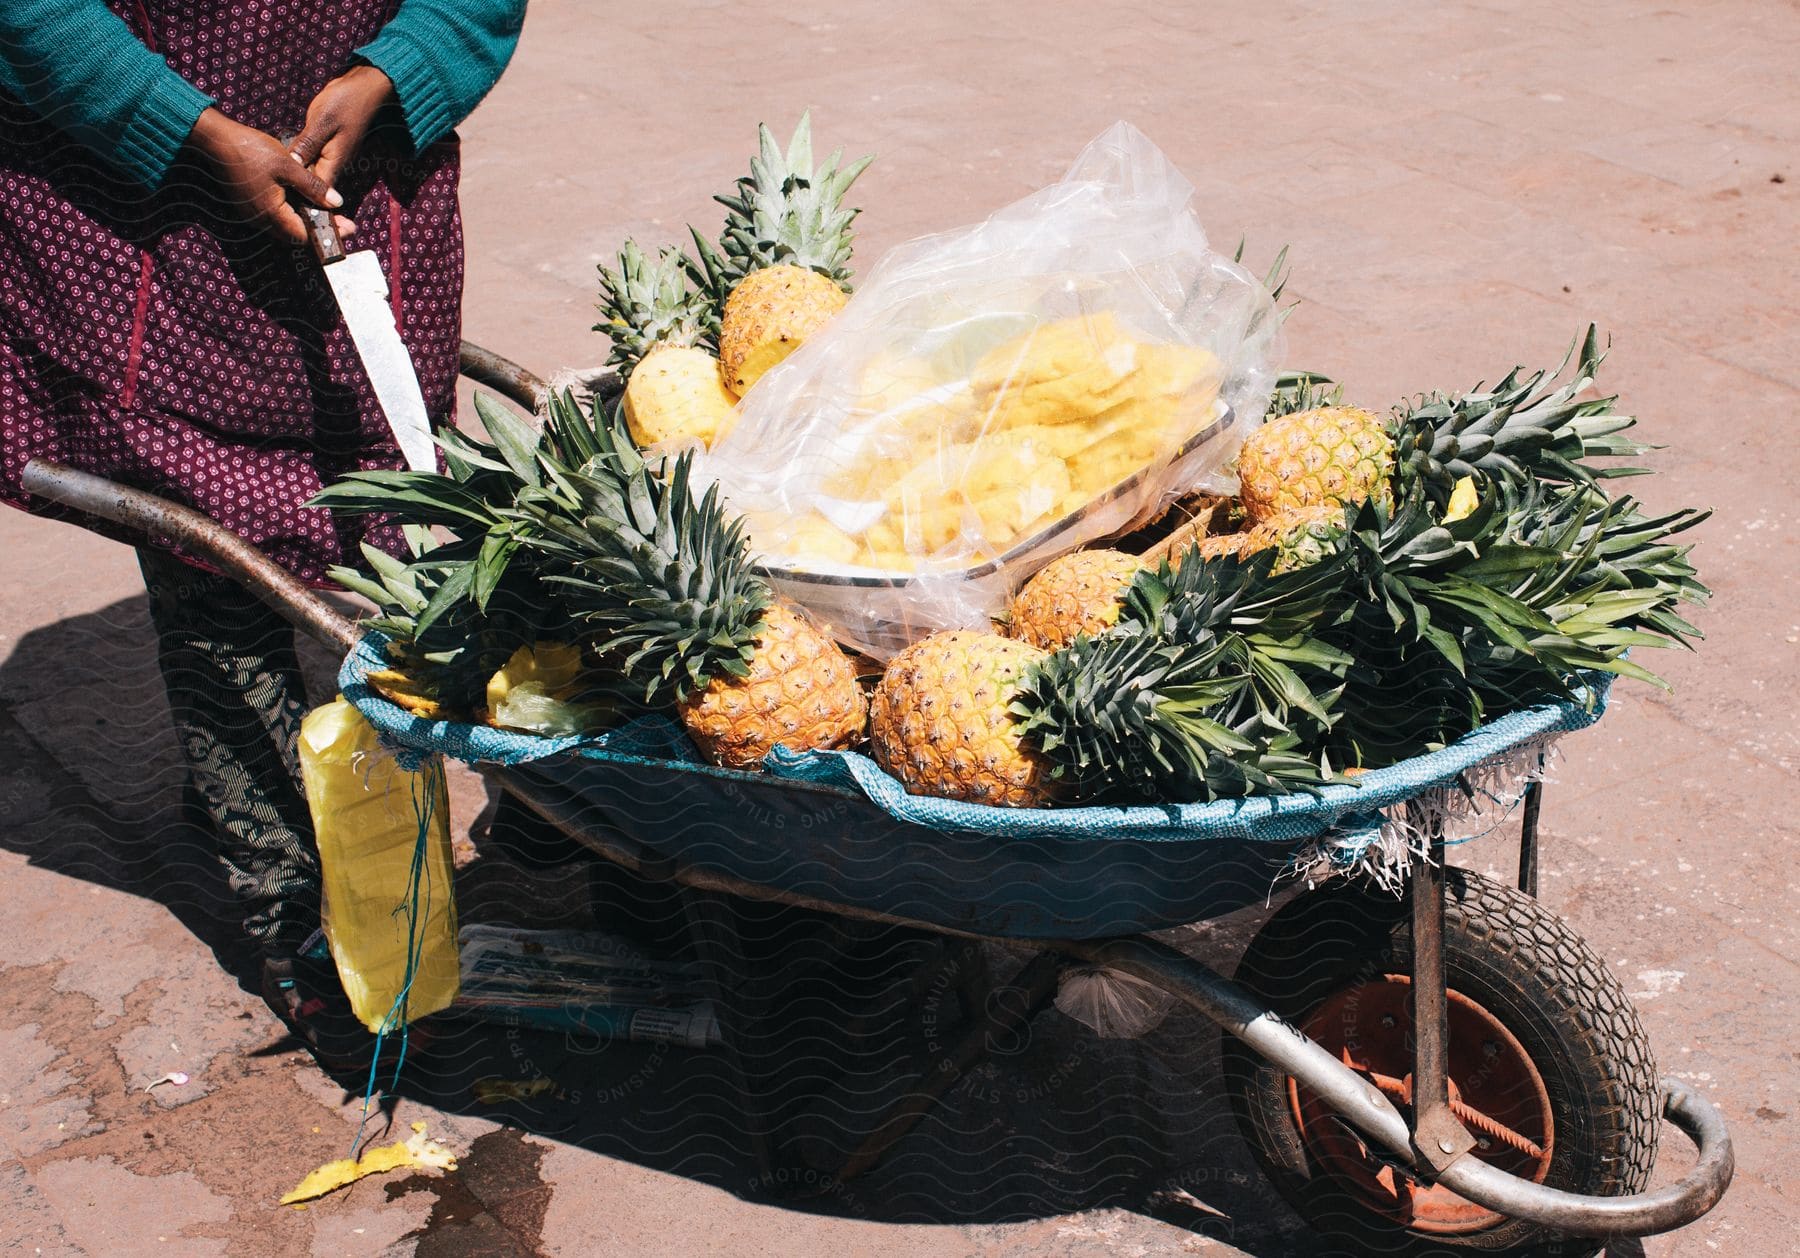 A woman with a knife stands next to a wheelbarrow loaded with pineapples